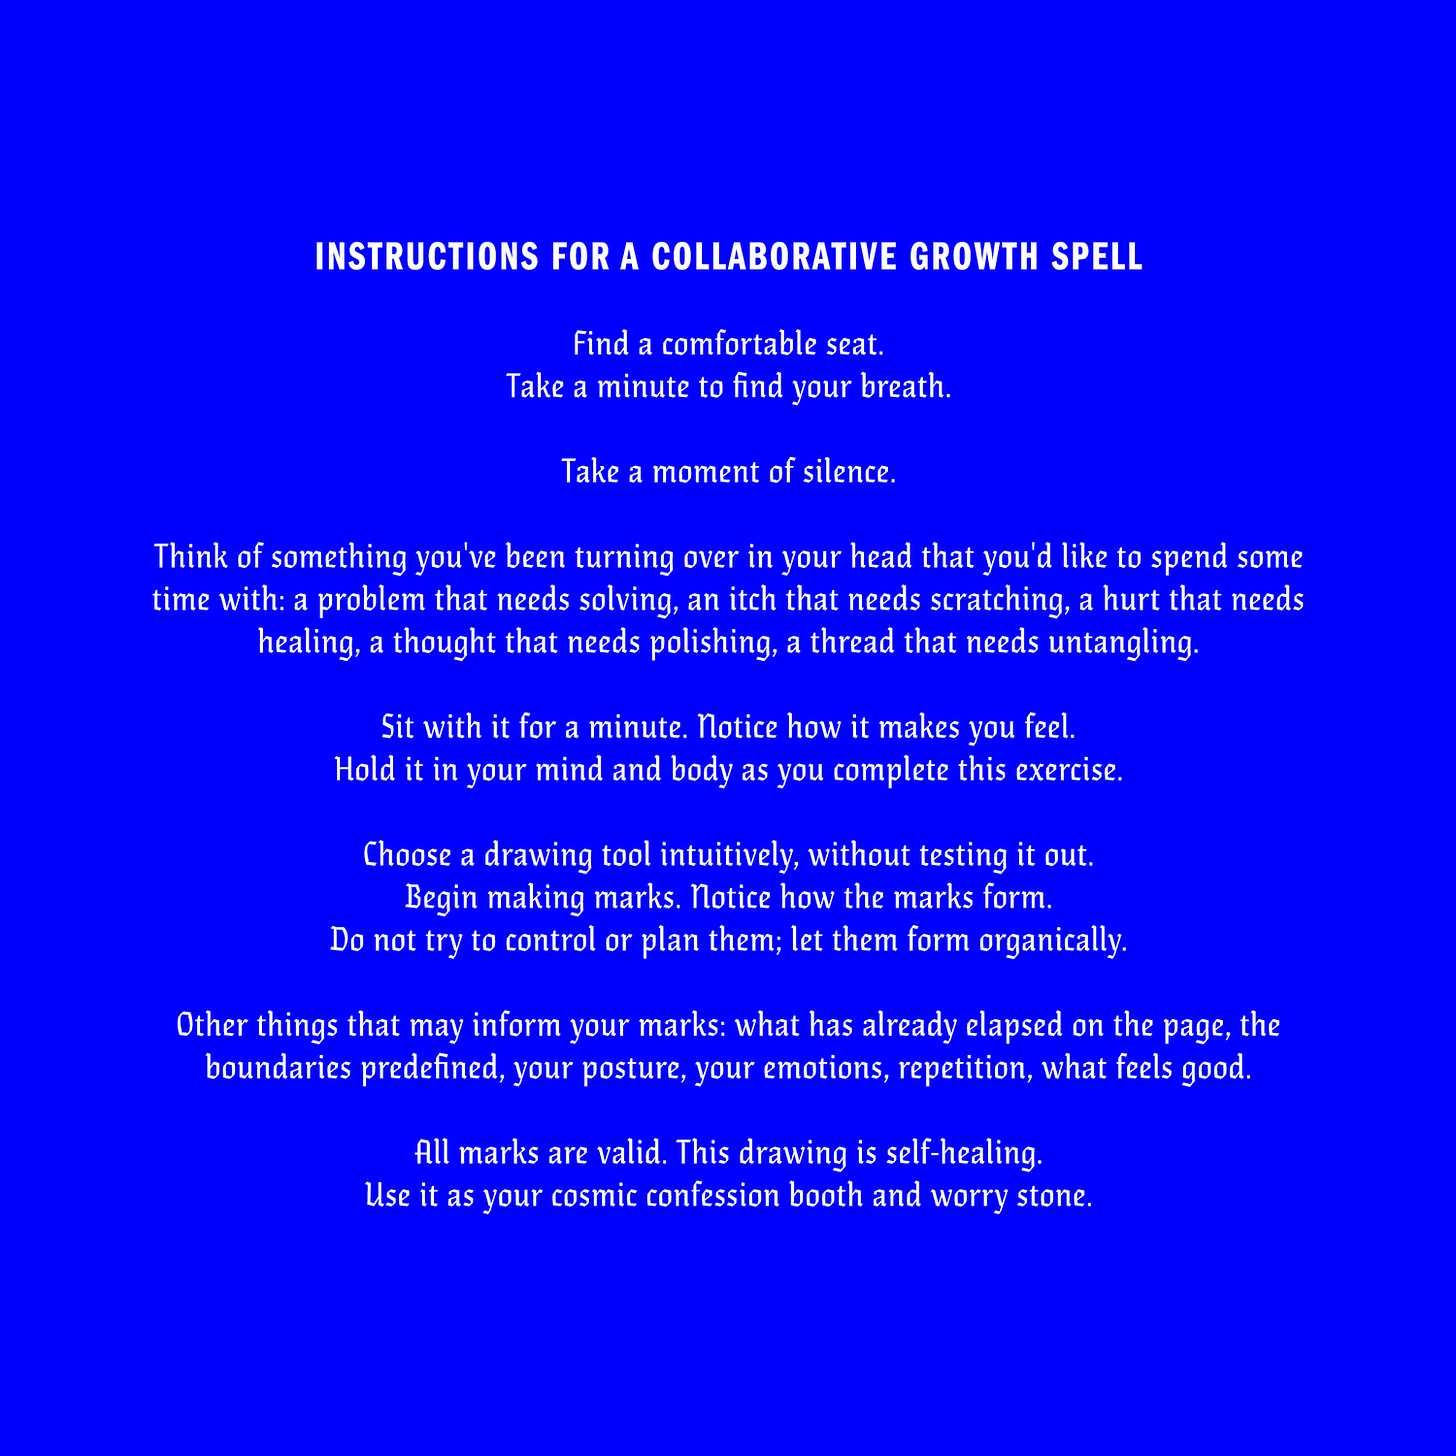 Written instructions for collaborative growth spells. Please see http://helentseng.com/#/growth-spells/ for more context/content